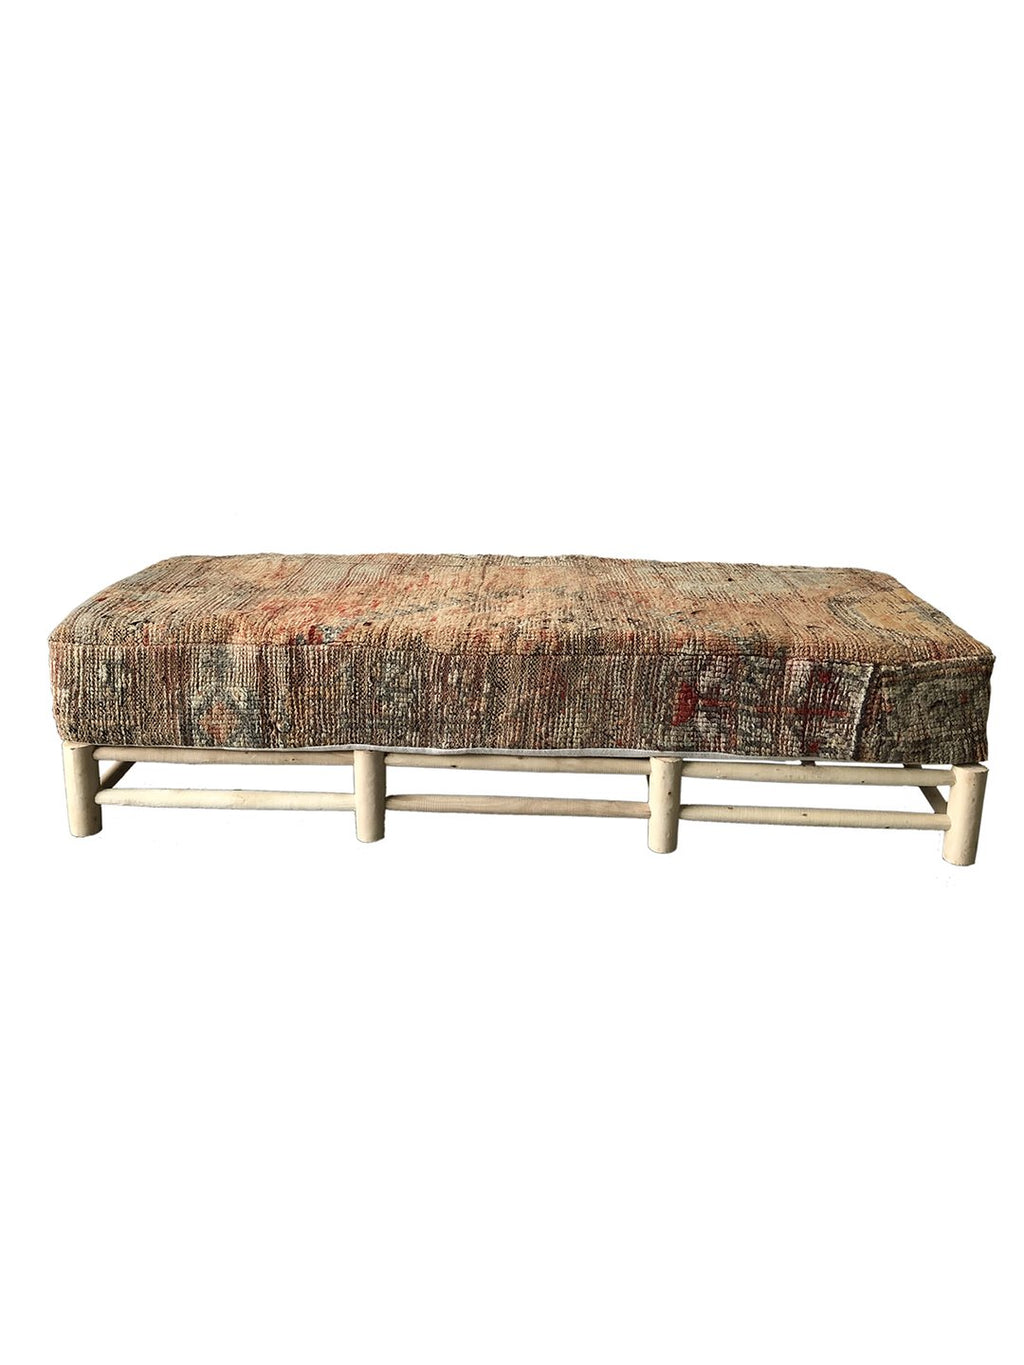 Daybed with Vintage Moroccan Rug Cover